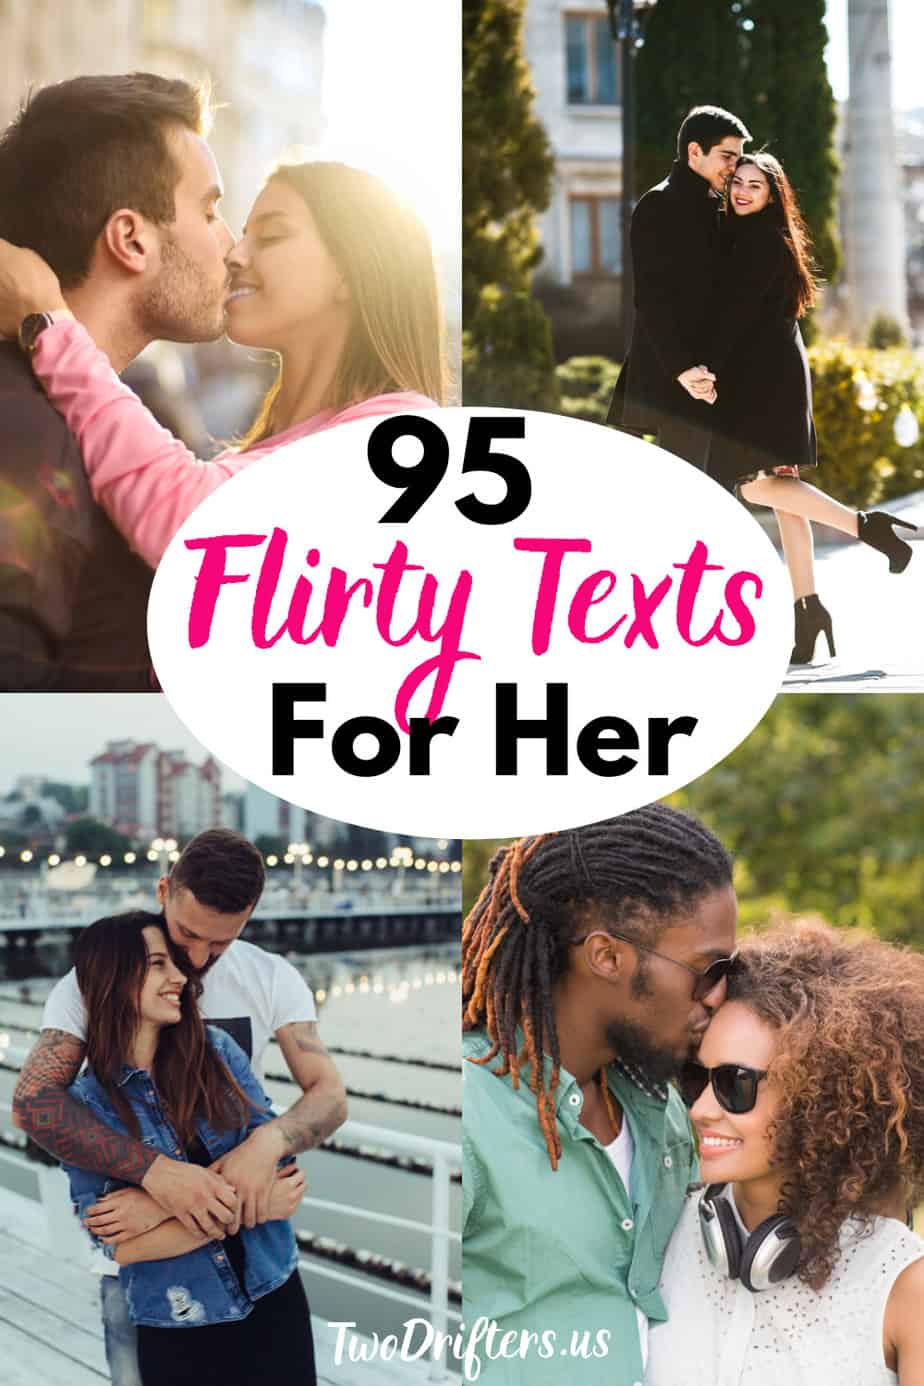 Pinterest social image that says “95 flirty texts for her."